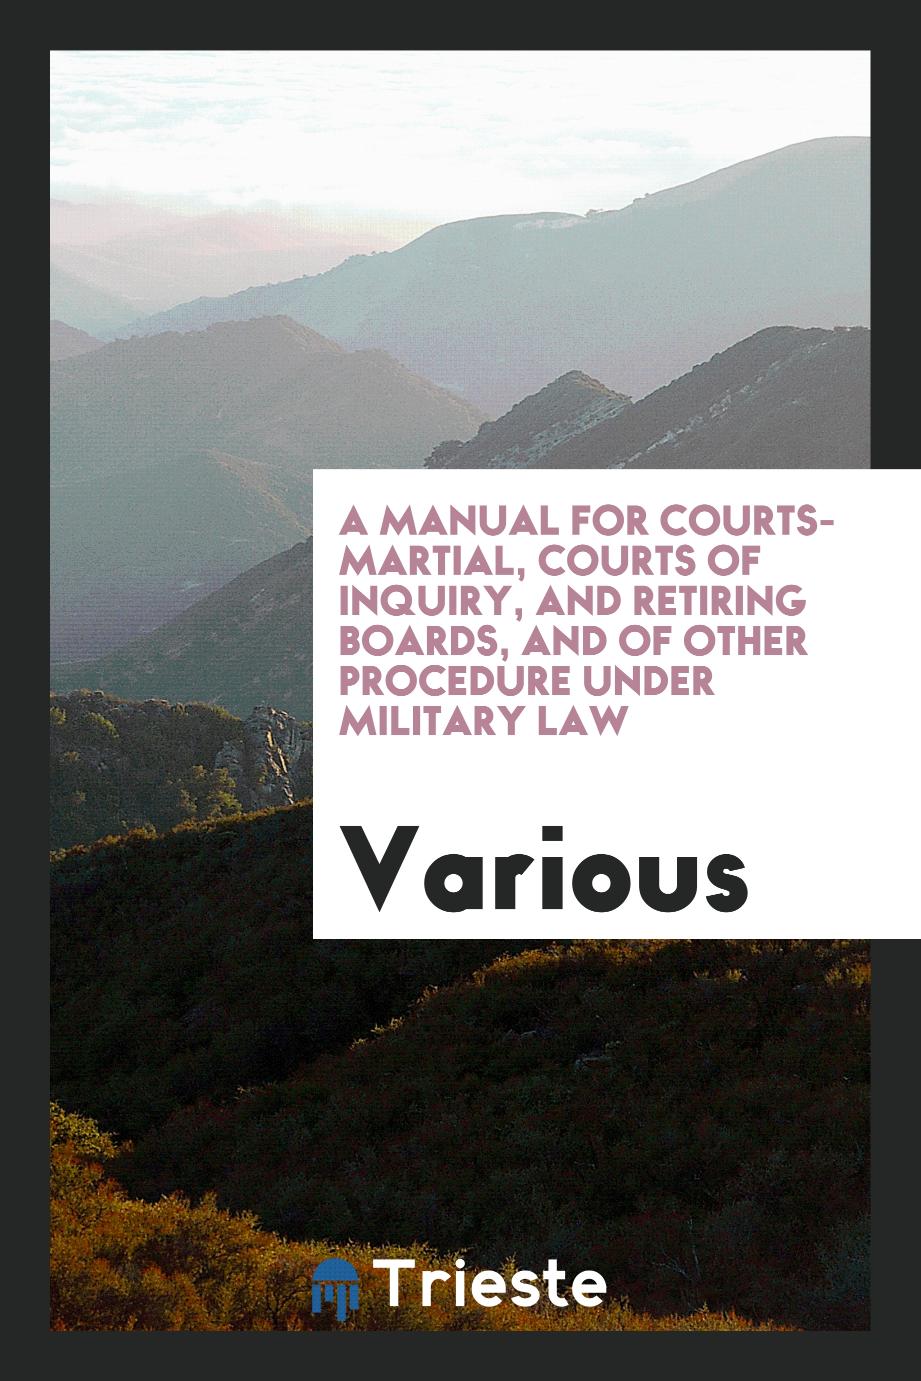 A manual for courts-martial, courts of inquiry, and retiring boards, and of other procedure under military law